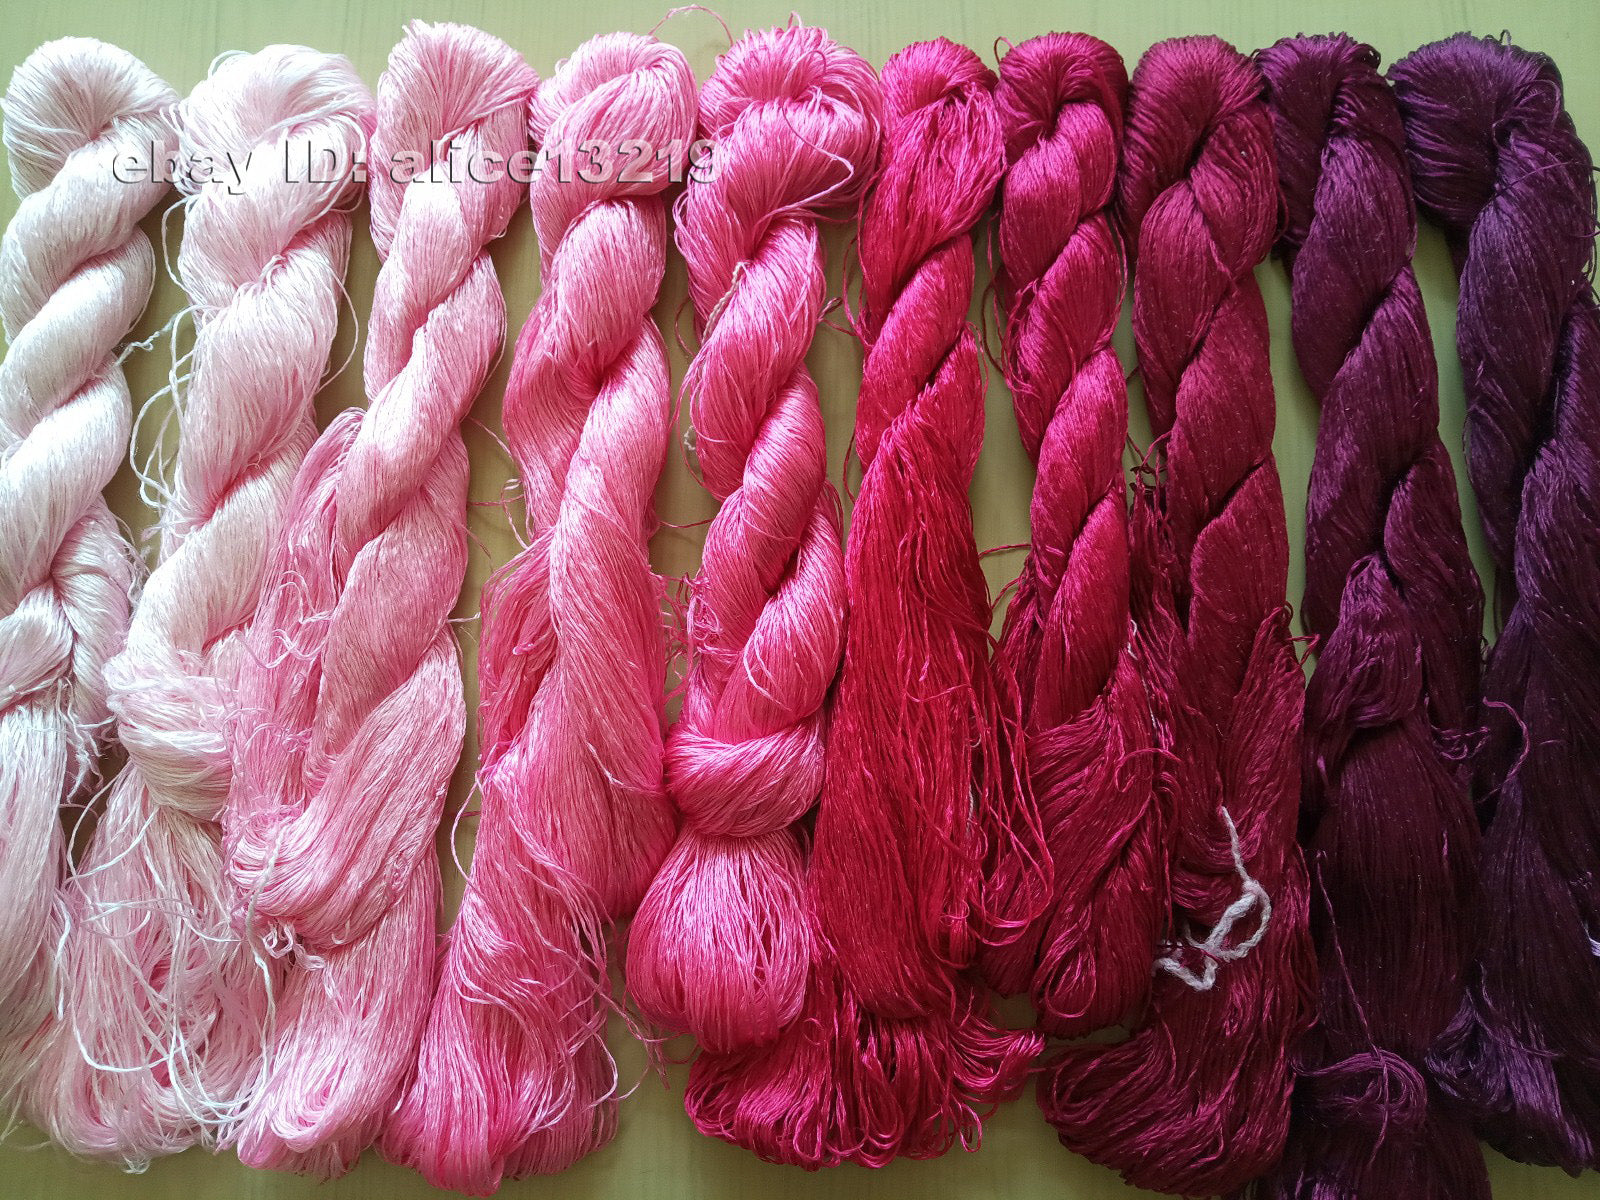 10bundles 100%real mulberry silk,hand-dyed embroidery silk floss/thread N25